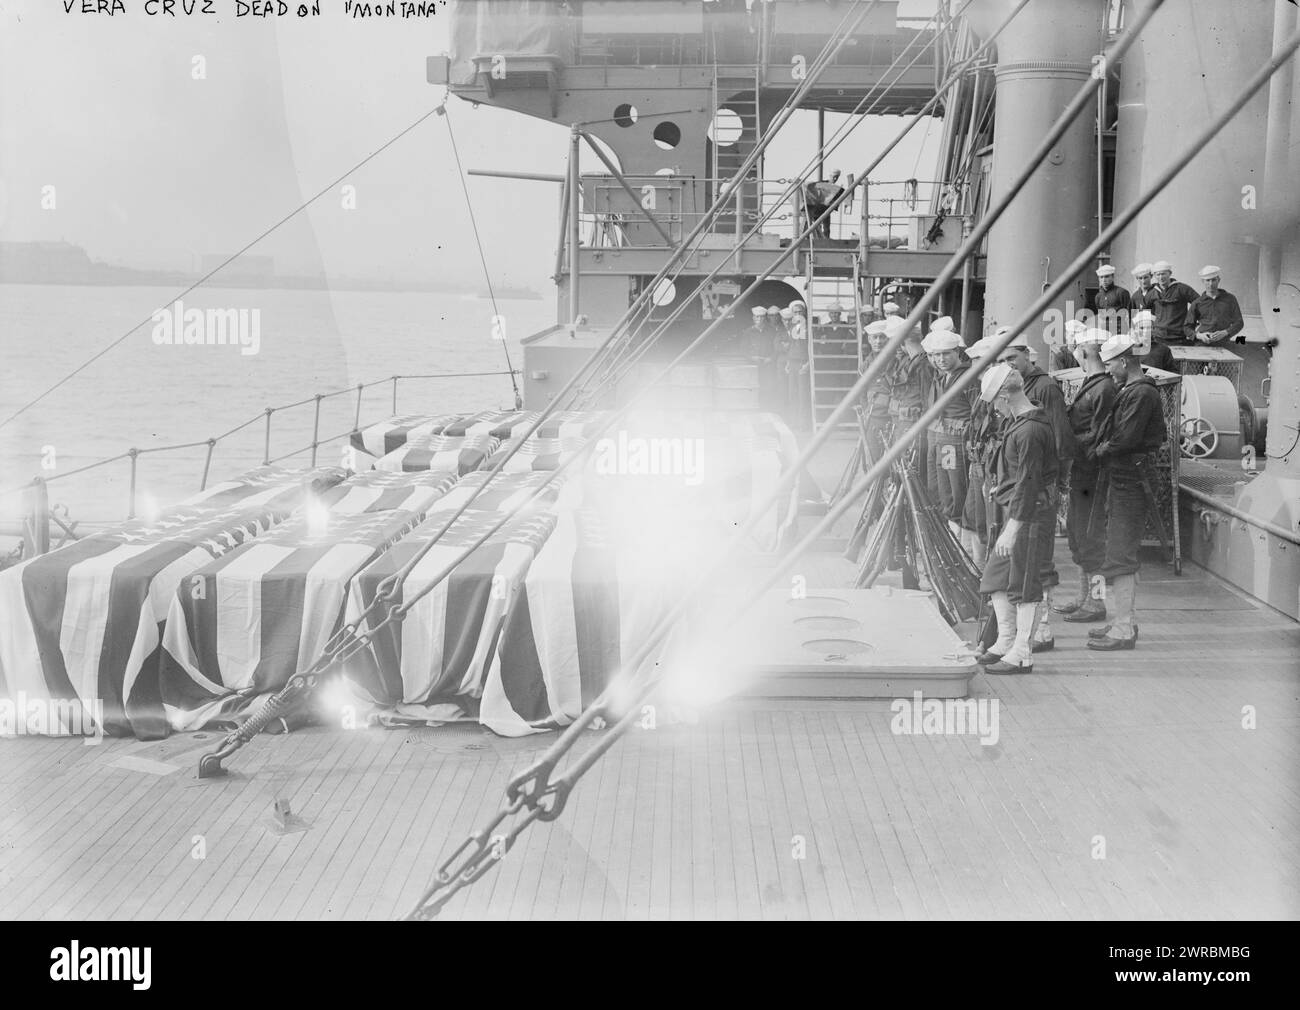 Vera Cruz dead on MONTANA, Photograph shows flag draped caskets on the Montana at Pier A, New York City before the National Memorial Service on May 11, 1914, in honor of the seamen and marines who were killed in Veracruz, Mexico during the Mexican Revolution., 1914 May 11, Glass negatives, 1 negative: glass Stock Photo